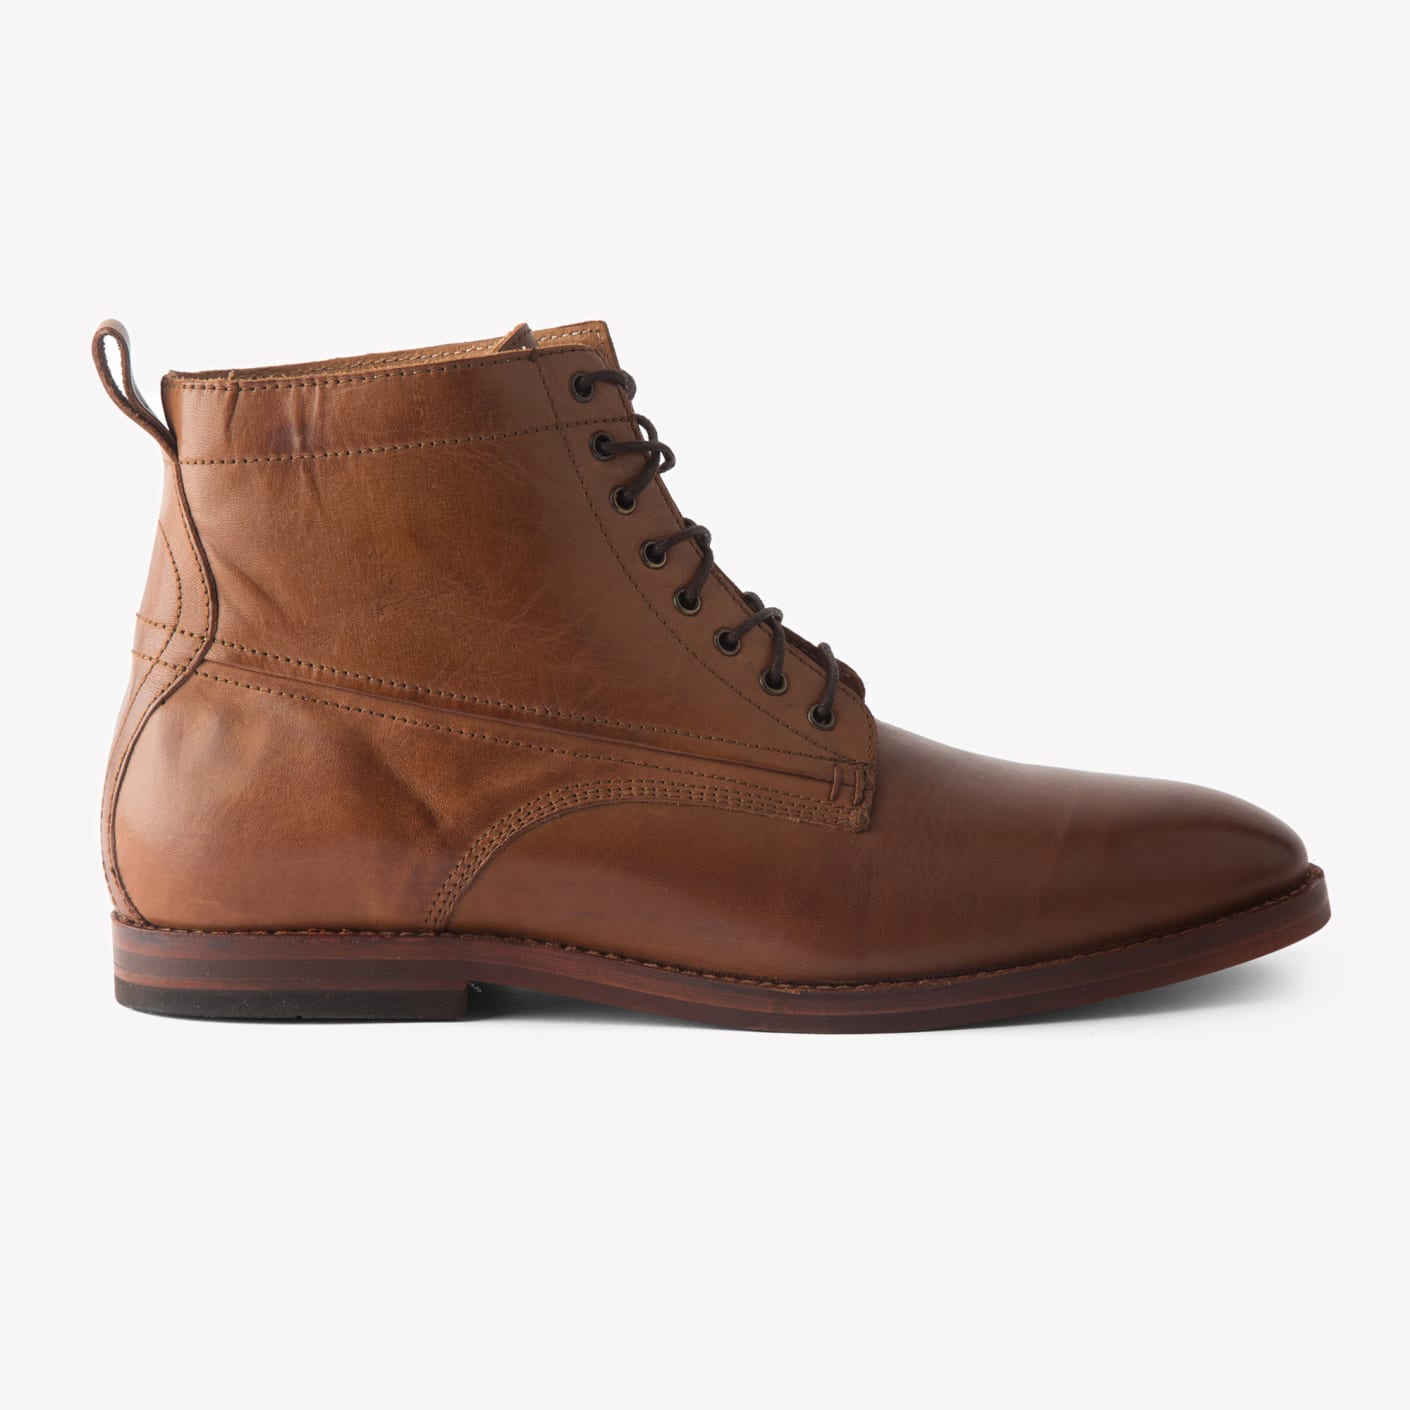 Hudson Shoes Forge Tan Boot | Bespoke Post